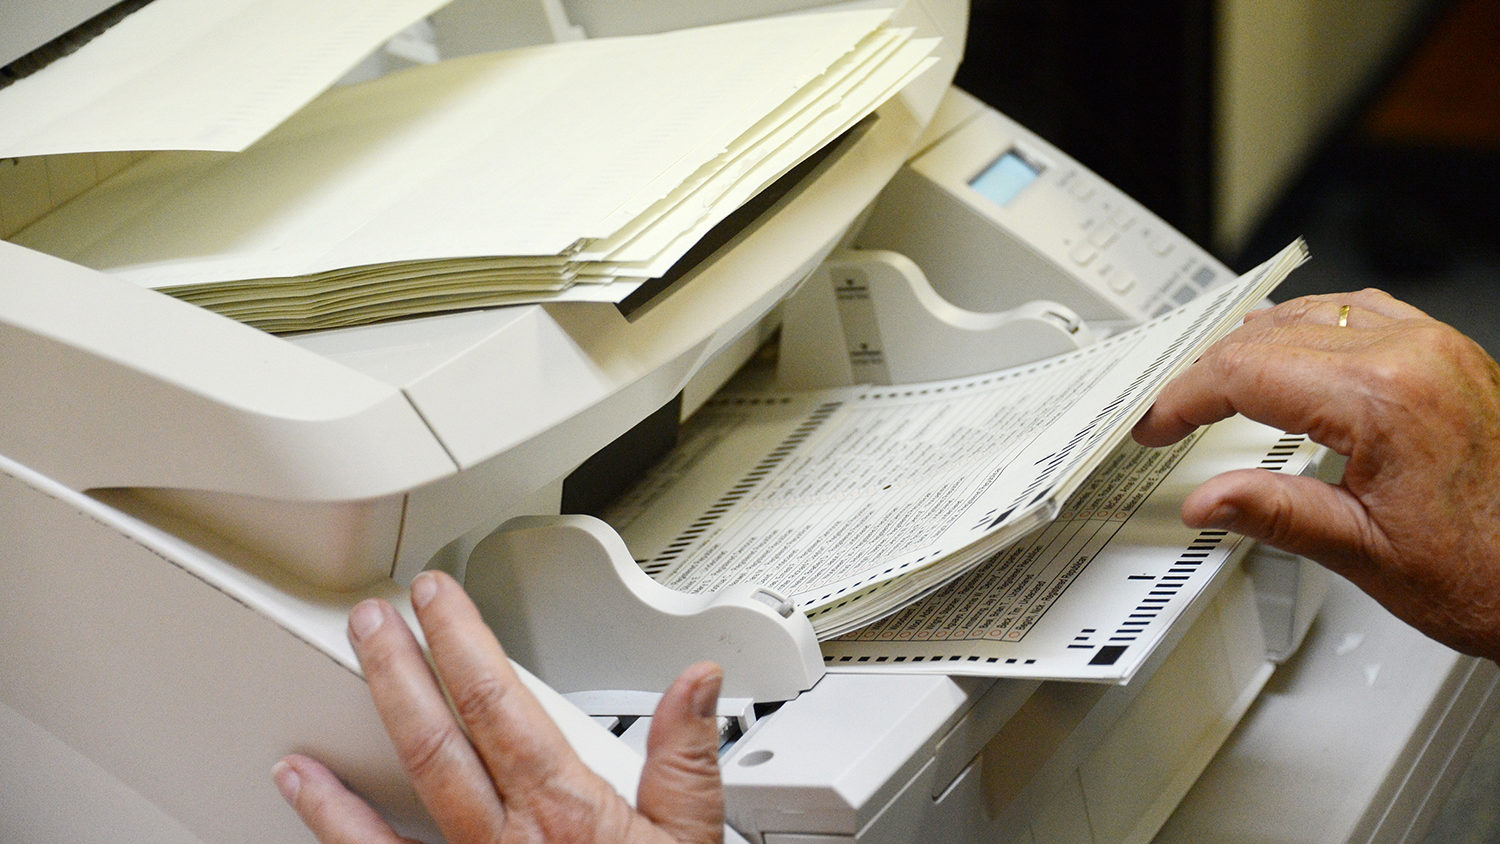 Some rural votes were again left uncounted in Alaska’s statewide election